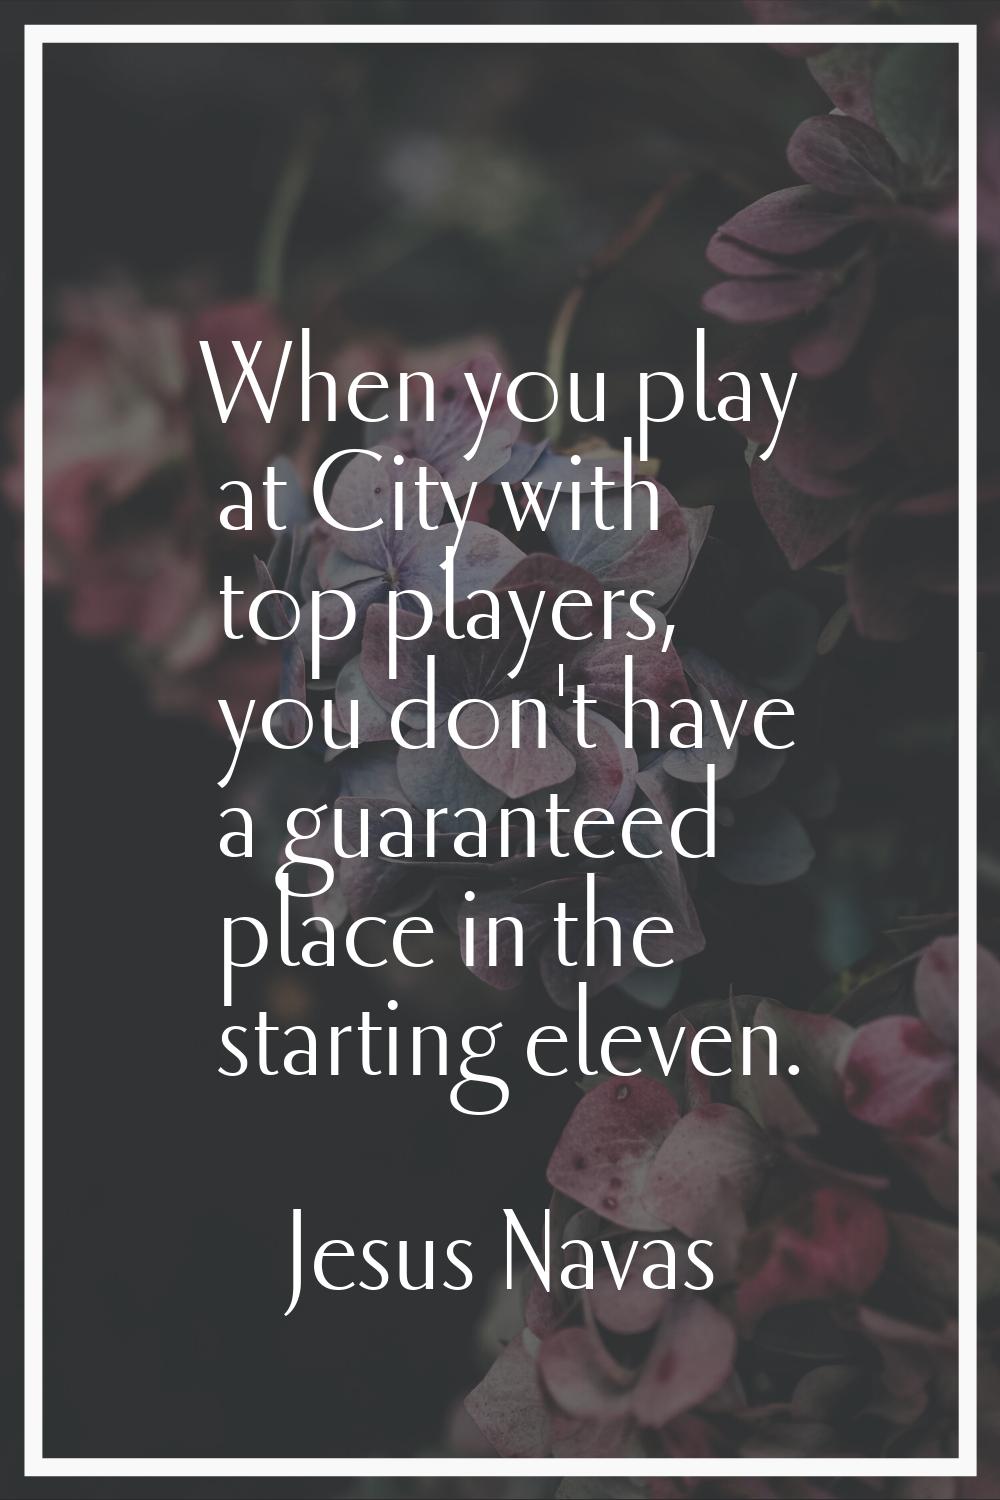 When you play at City with top players, you don't have a guaranteed place in the starting eleven.